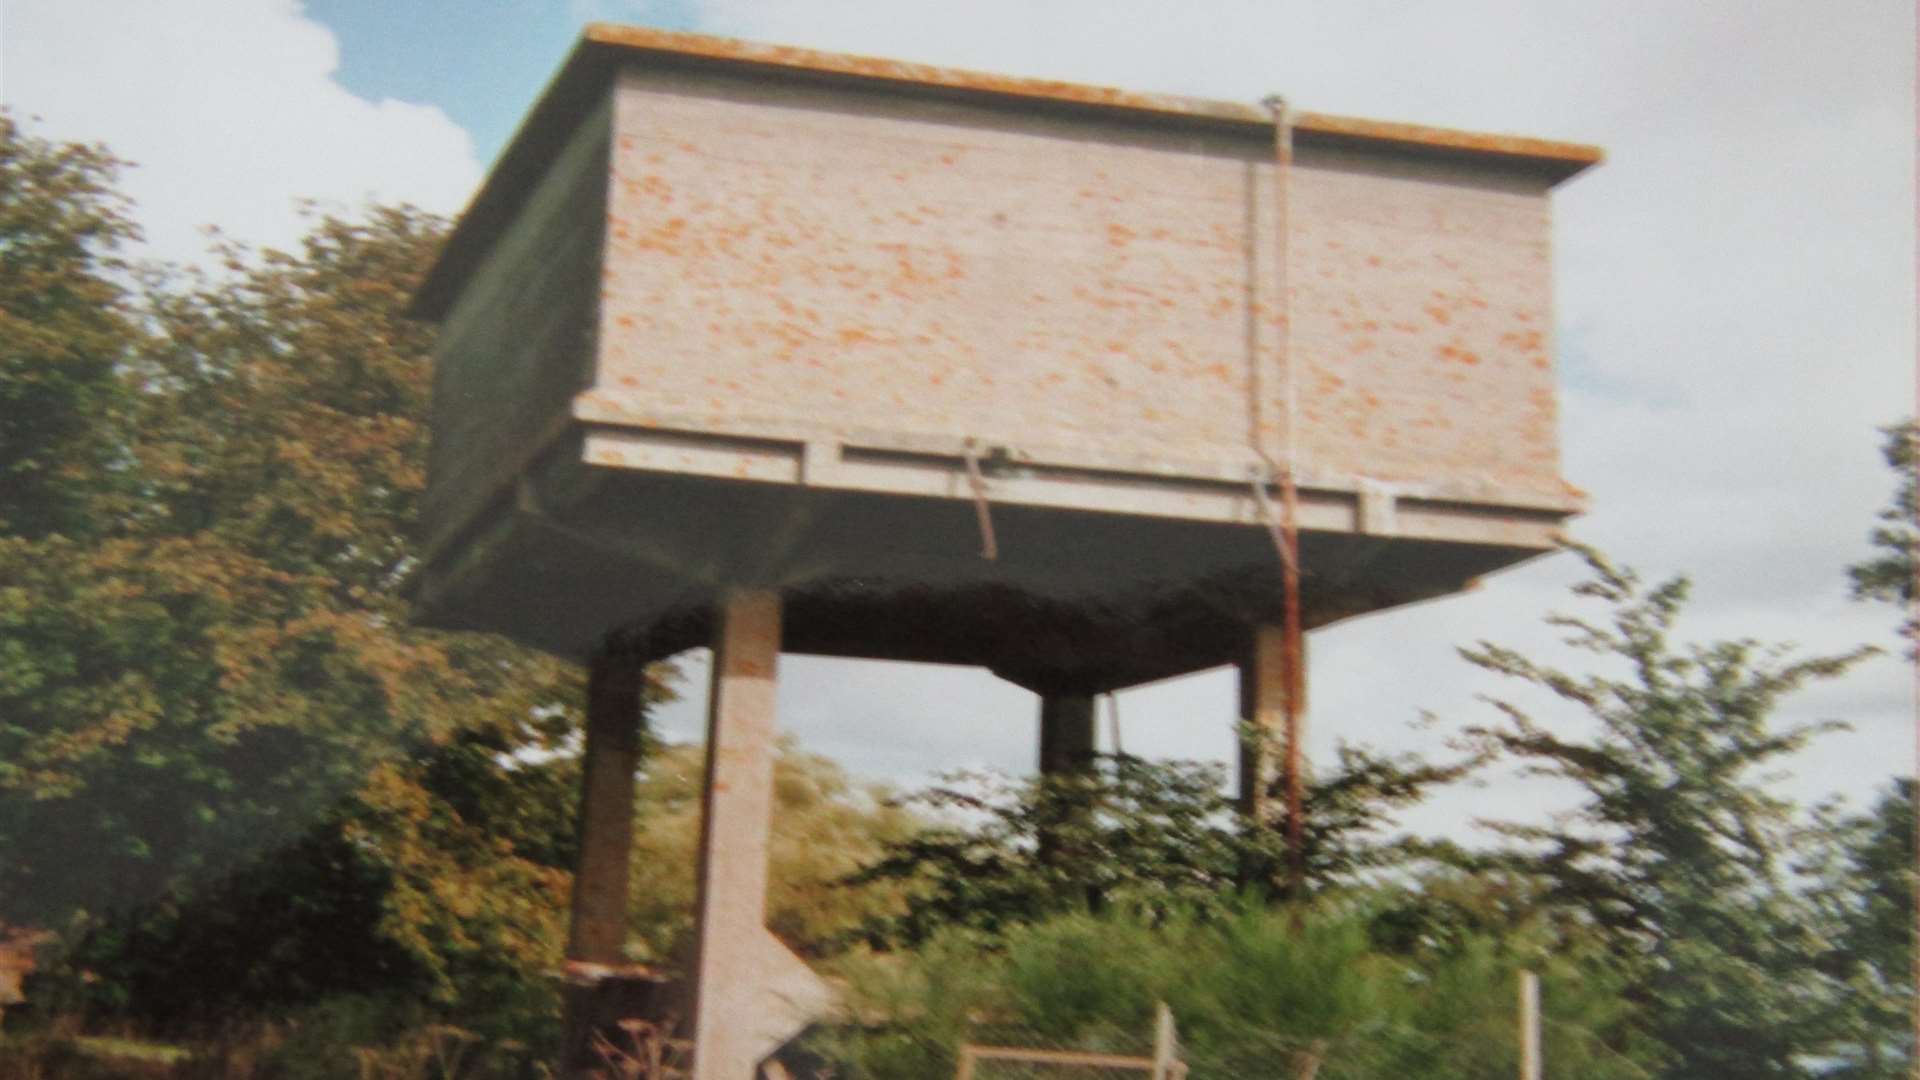 The concrete water tower before it was transformed